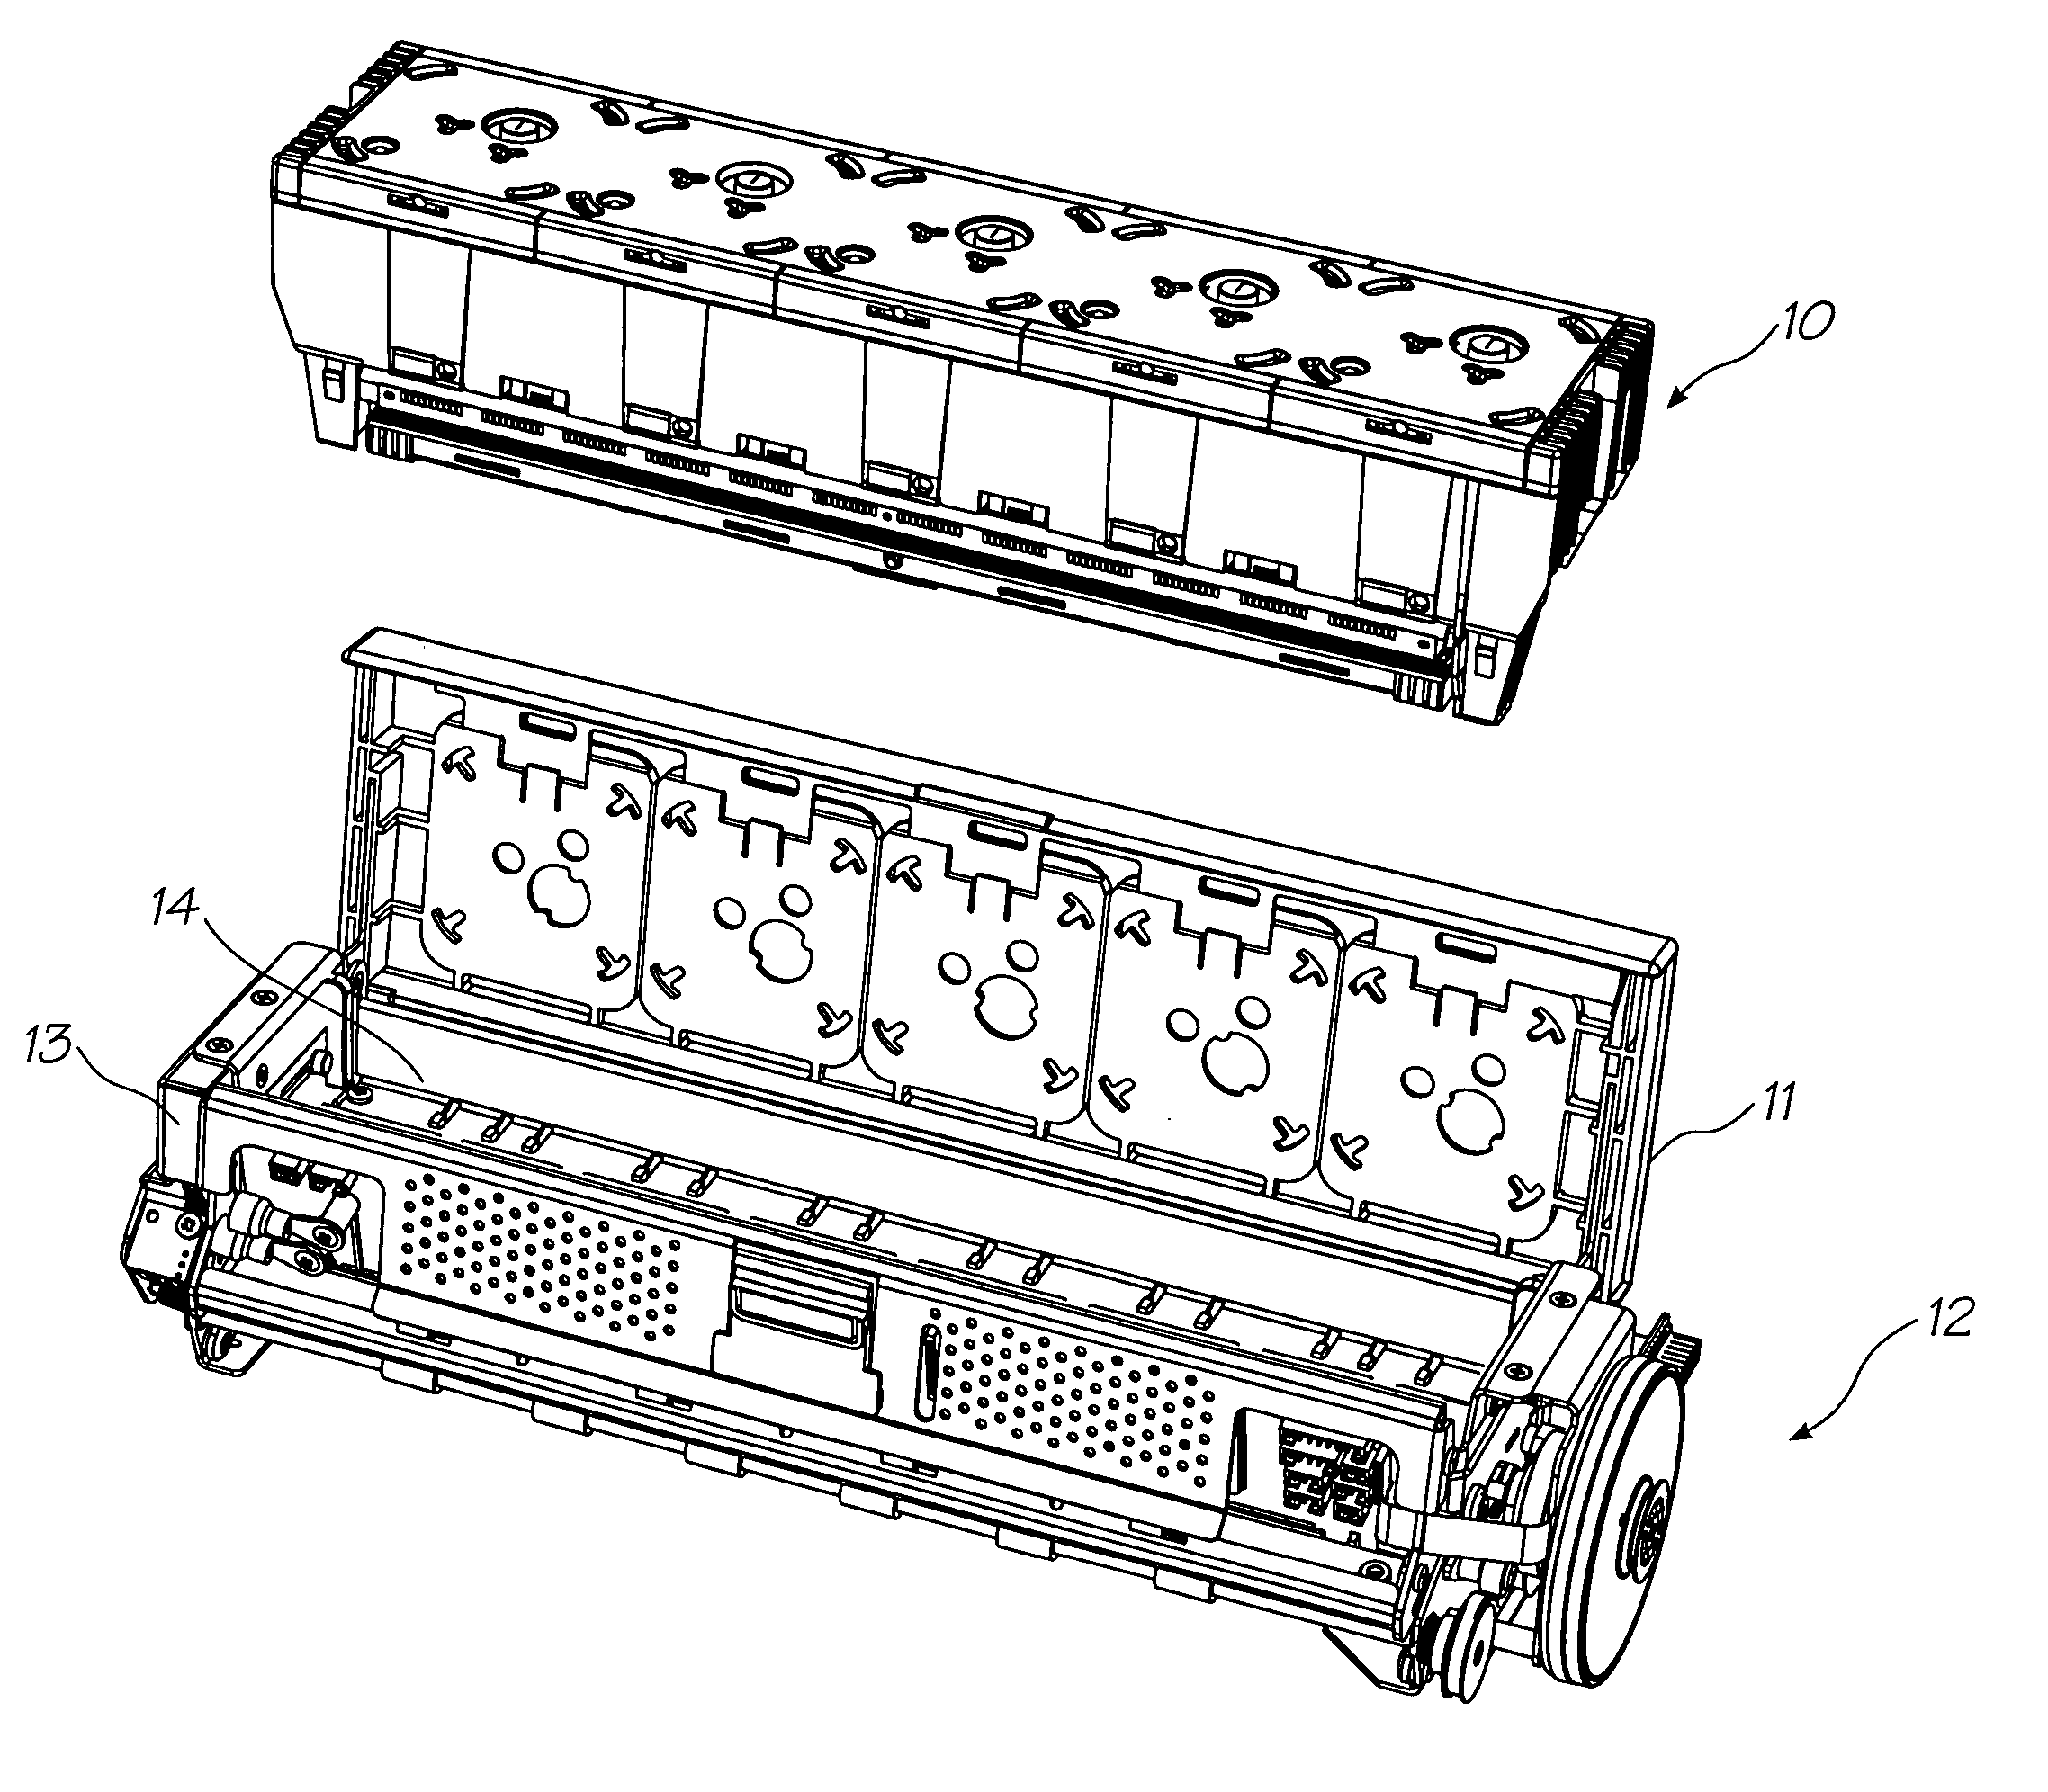 Inkjet printer with cradle for unobstructed access to cartridge